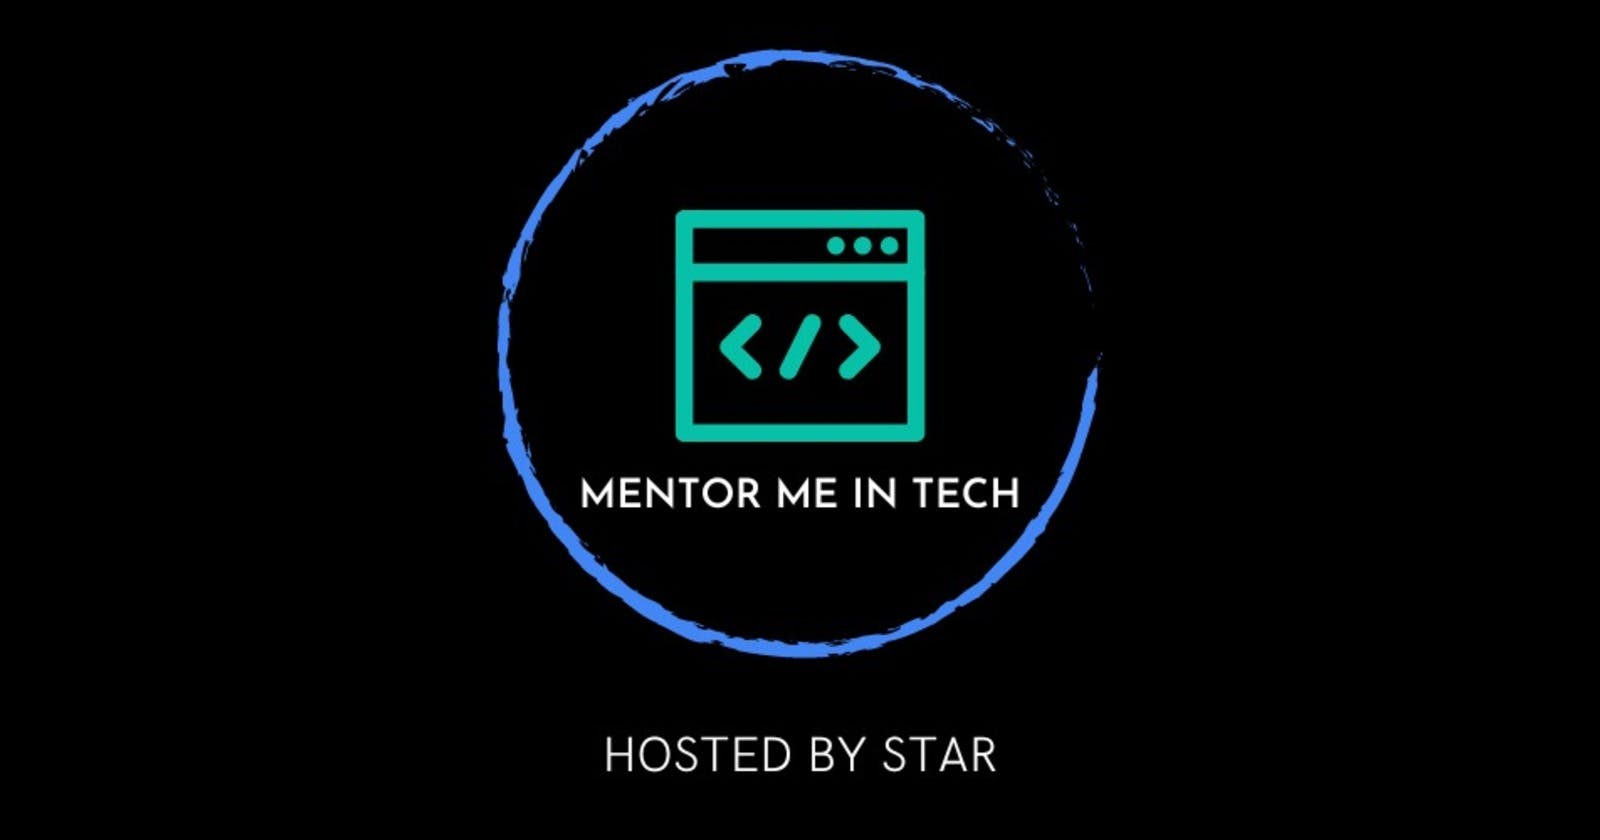 Get Tech-Ready with MentorMeInTech: Your Trusted Mentor.